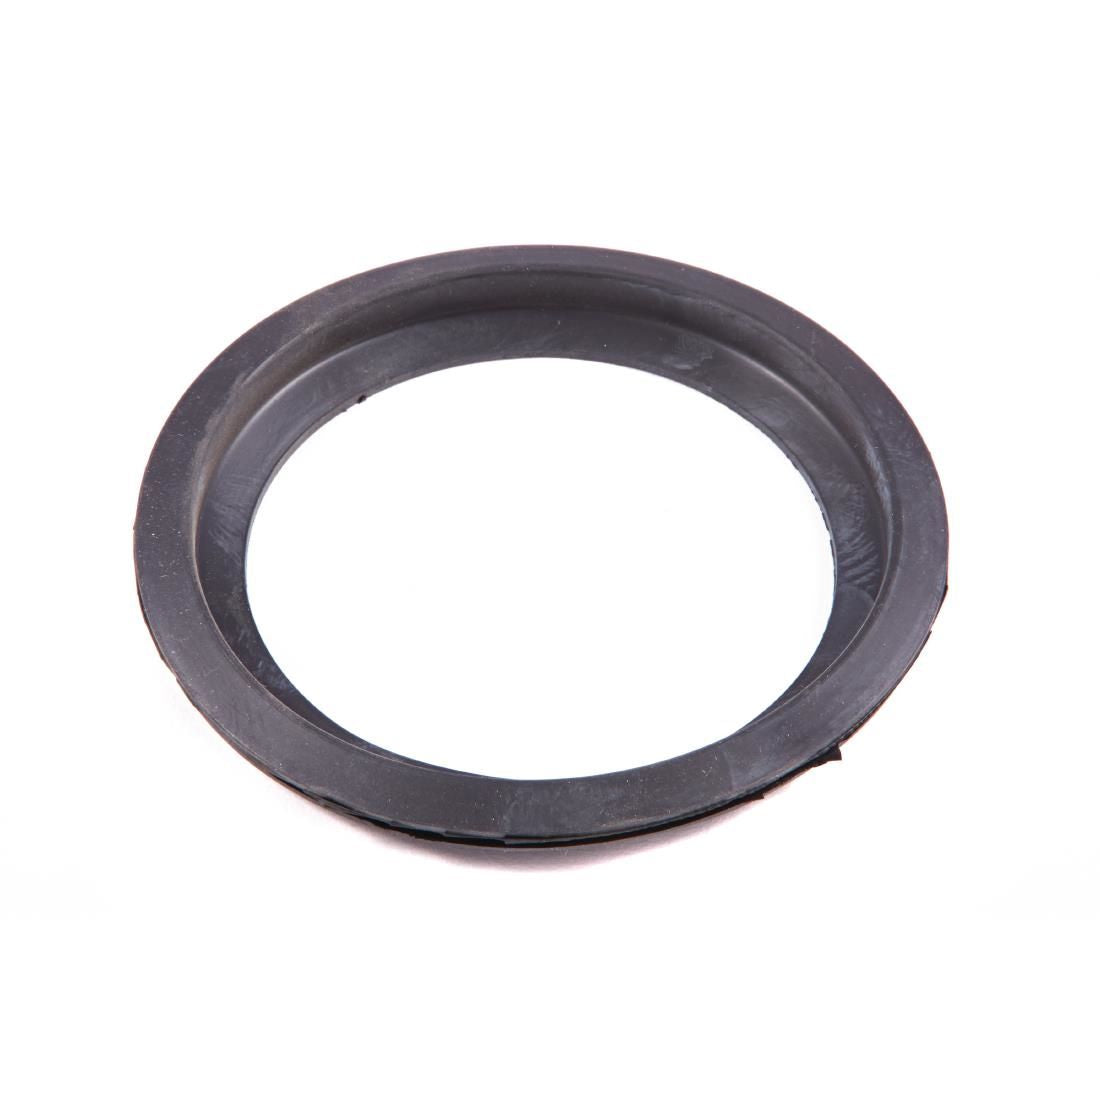 Bowl Rubber Gasket JD Catering Equipment Solutions Ltd